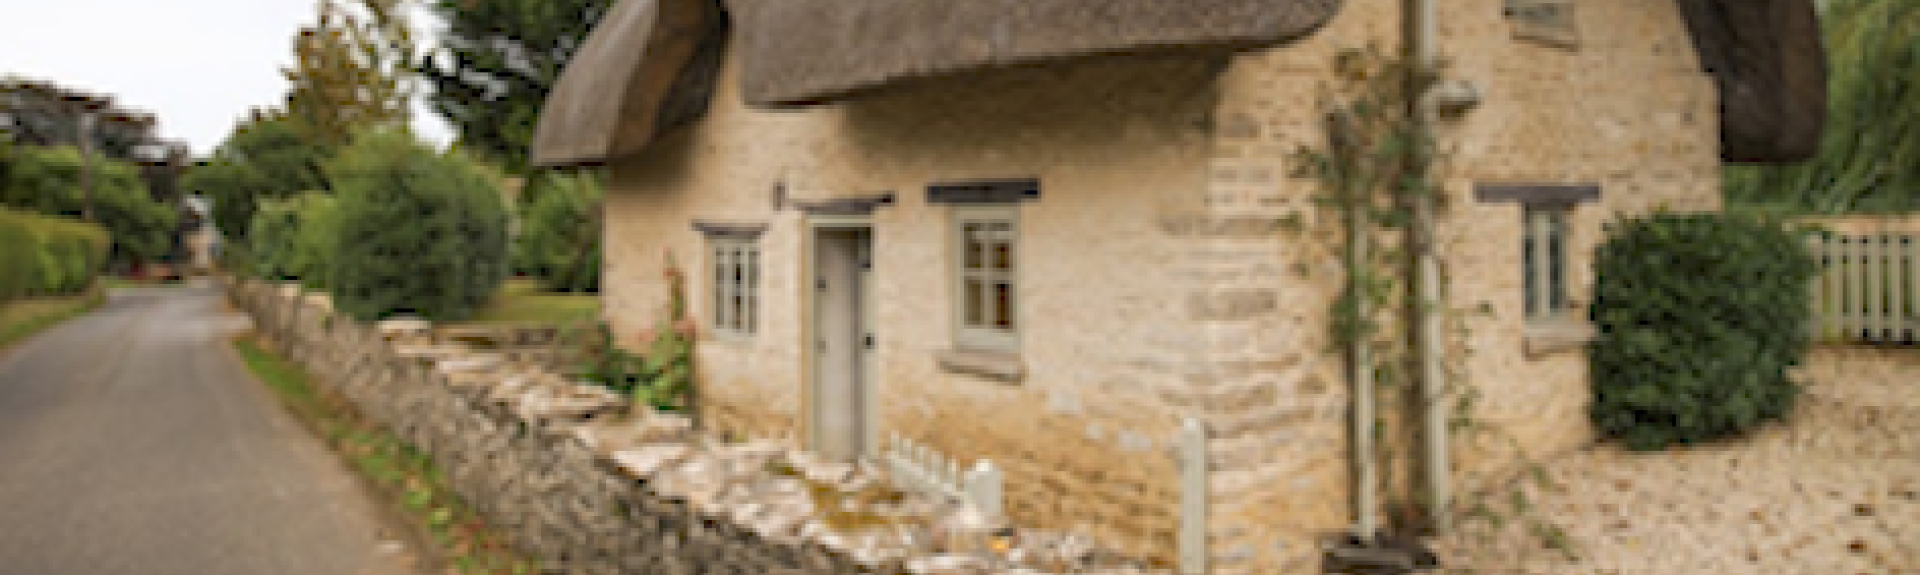 Exterior of a thatched 2-storey village holiday cottage in the Cotswolds.